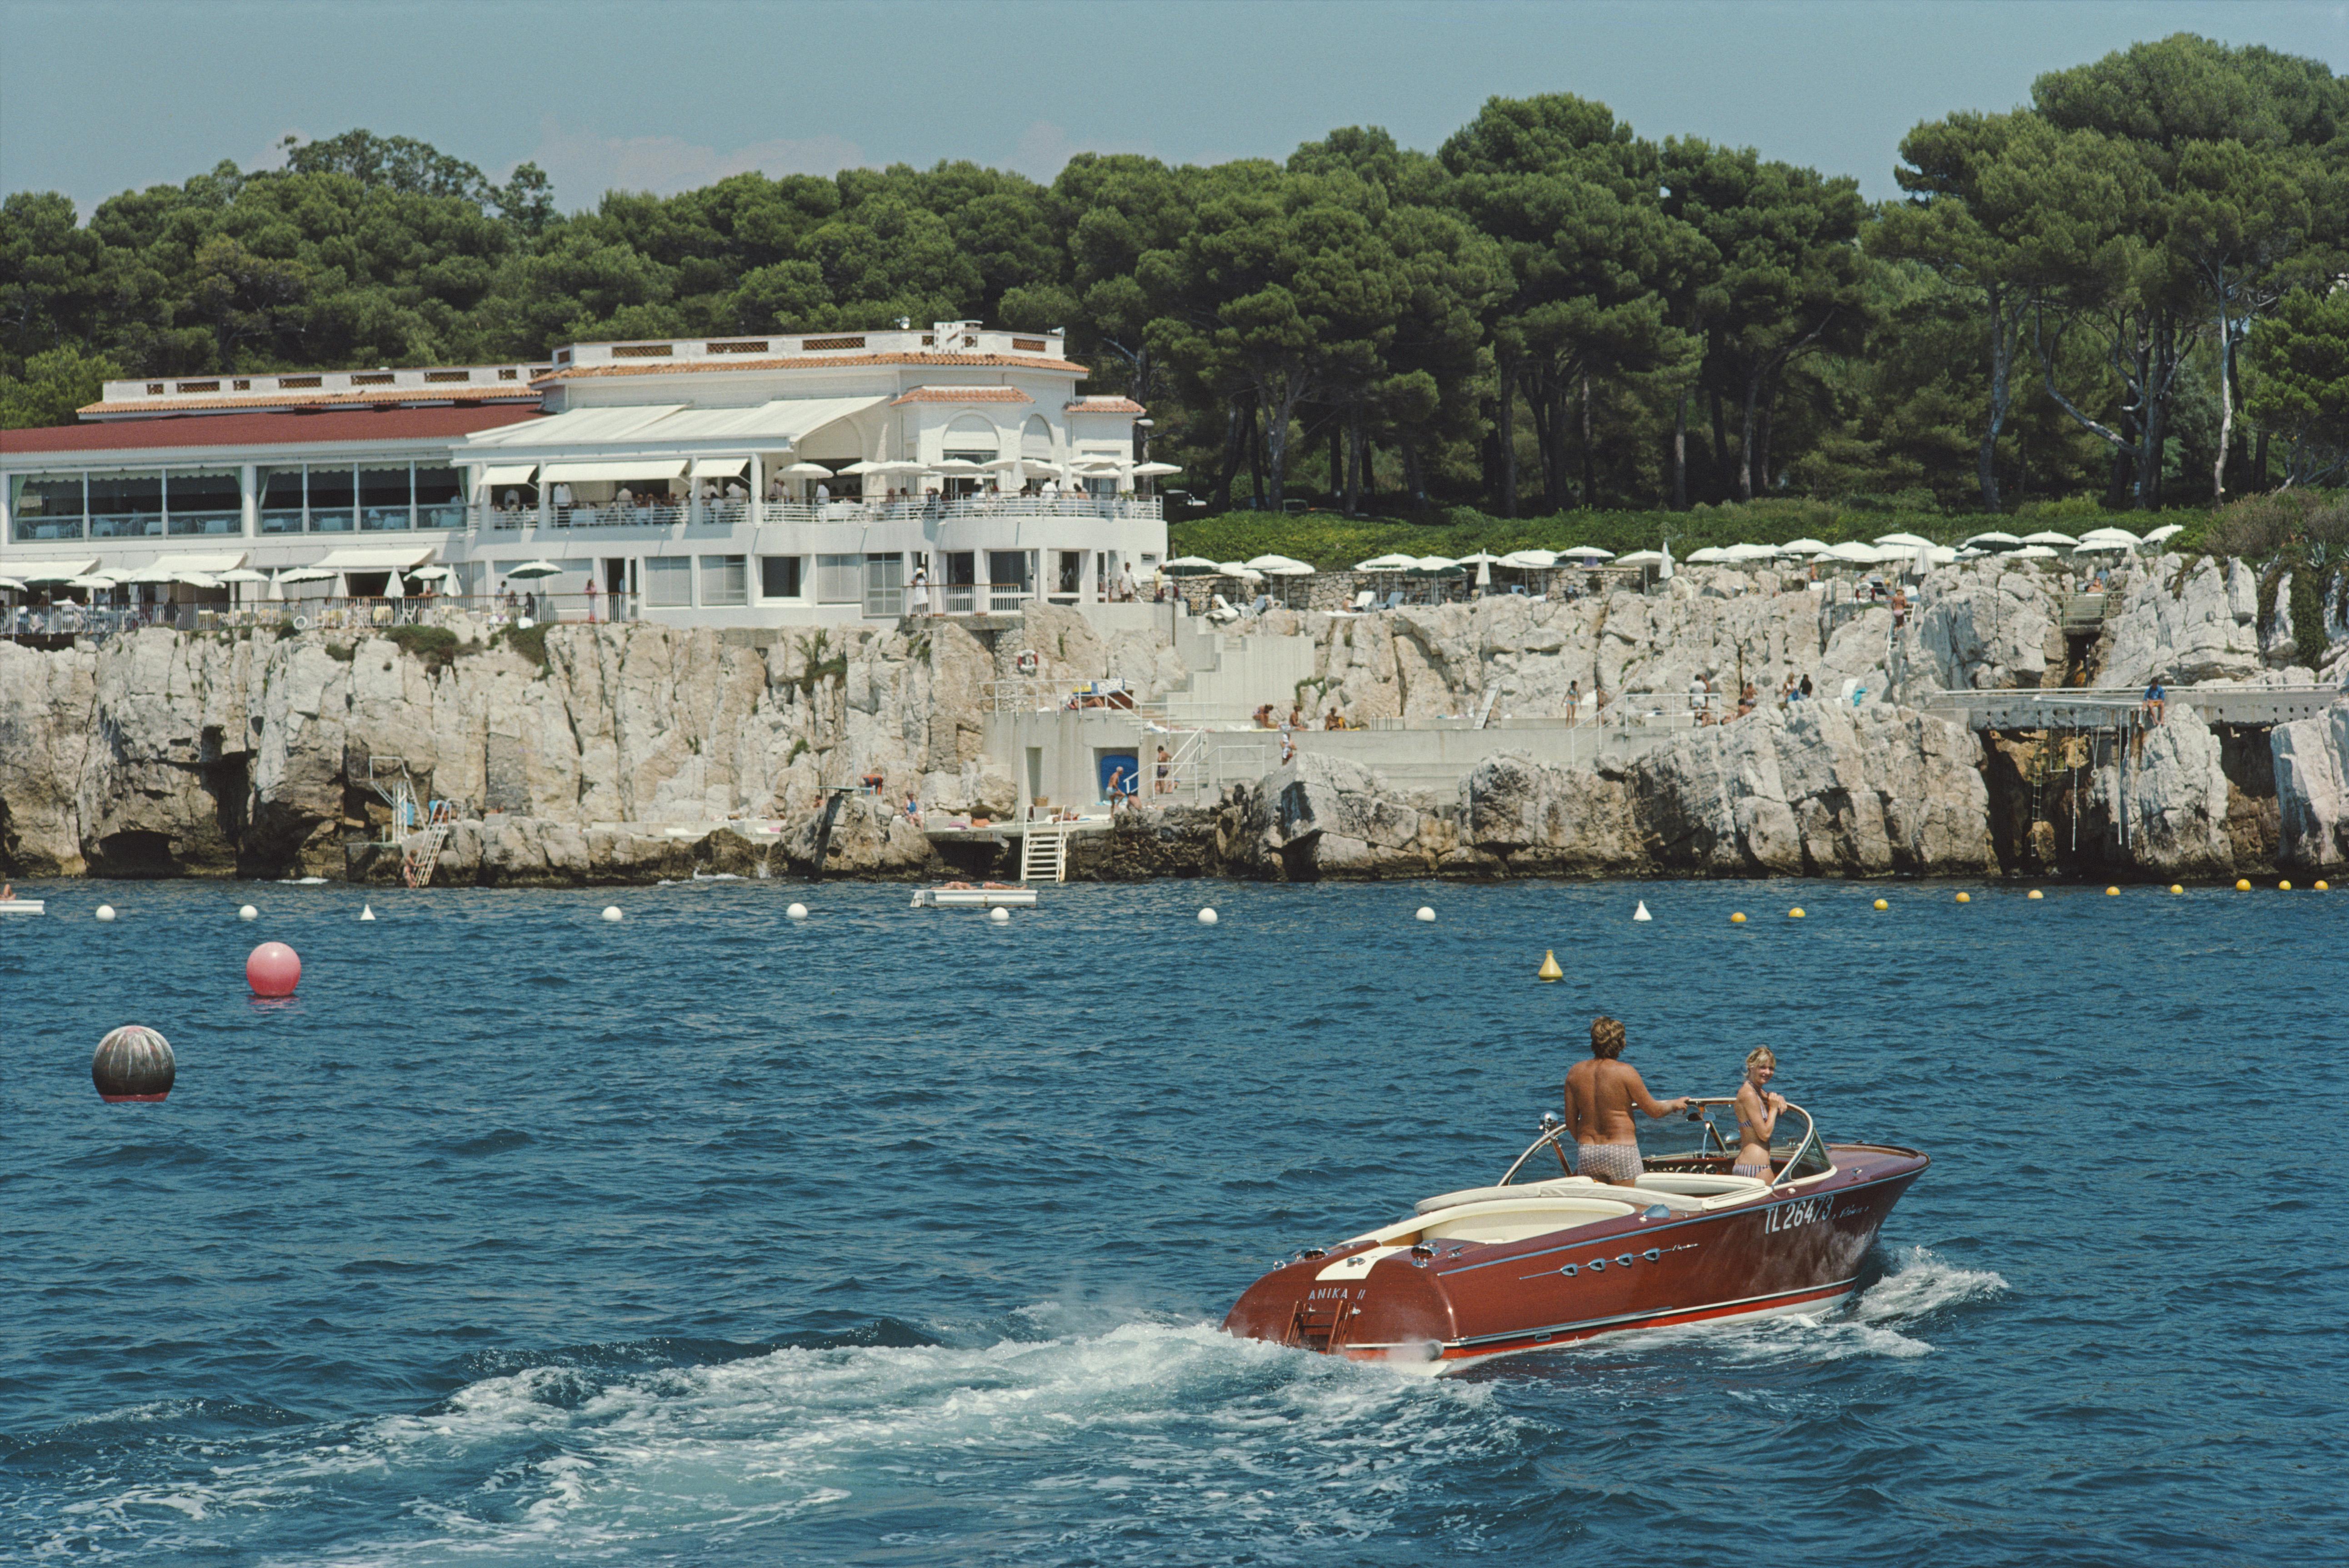 'Hotel Du Cap-Eden-Roc' 1969 Slim Aarons Limited Estate Edition Print 

Holidaymakers in a motorboat off the Hotel du Cap-Eden-Roc in Antibes on the French Riviera, 1969. 

Produced from the original transparency
Certificate of authenticity supplied